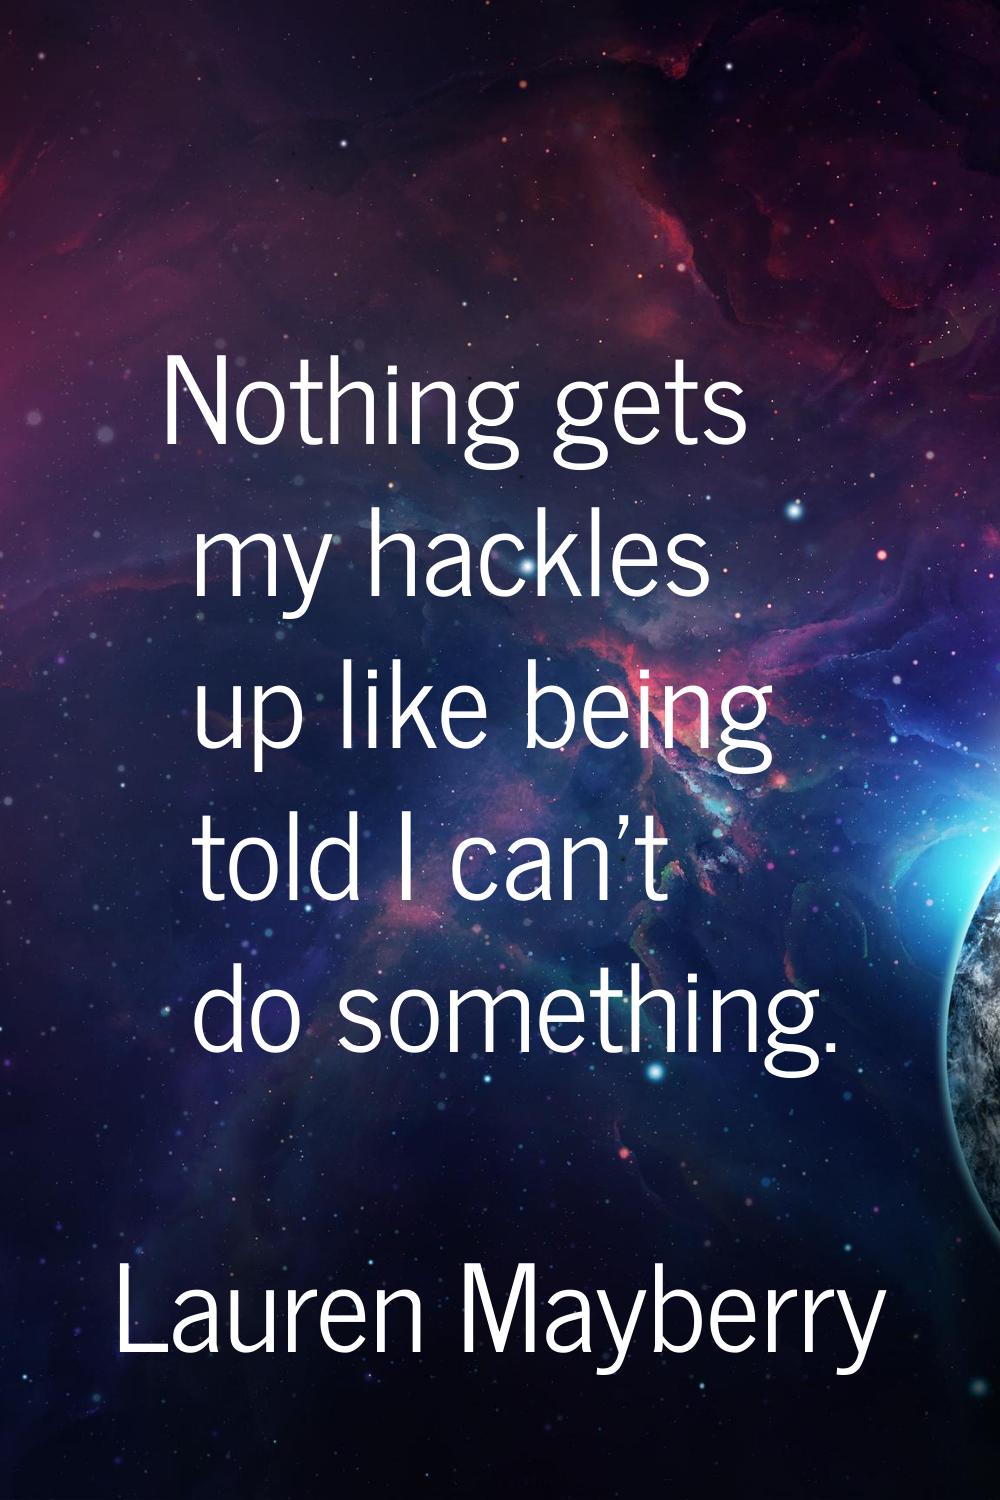 Nothing gets my hackles up like being told I can't do something.